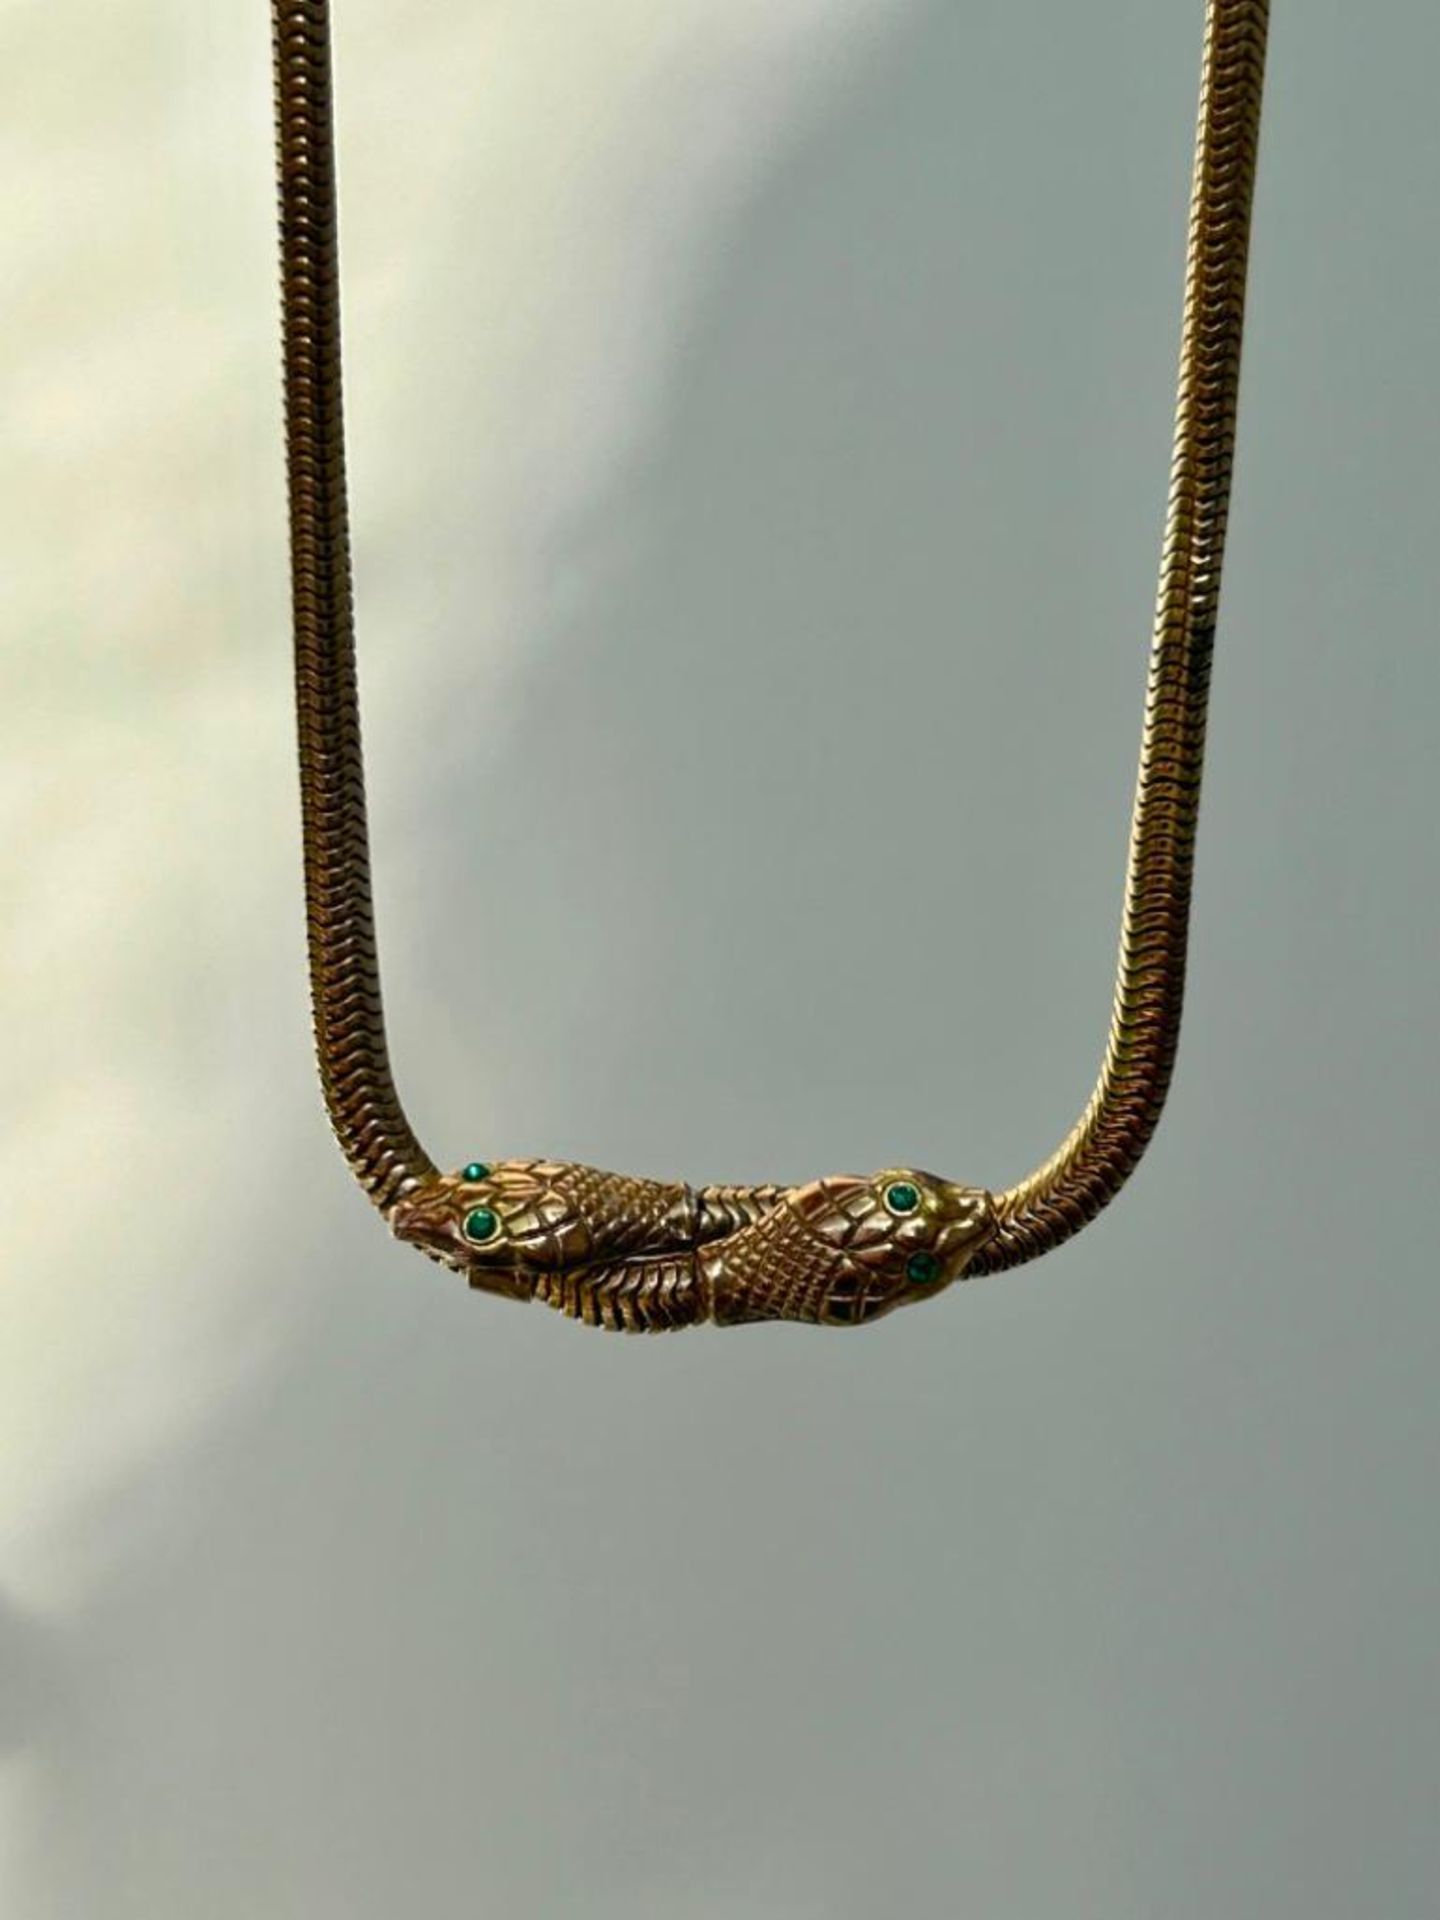 Double Headed Snake Necklace - Image 7 of 7